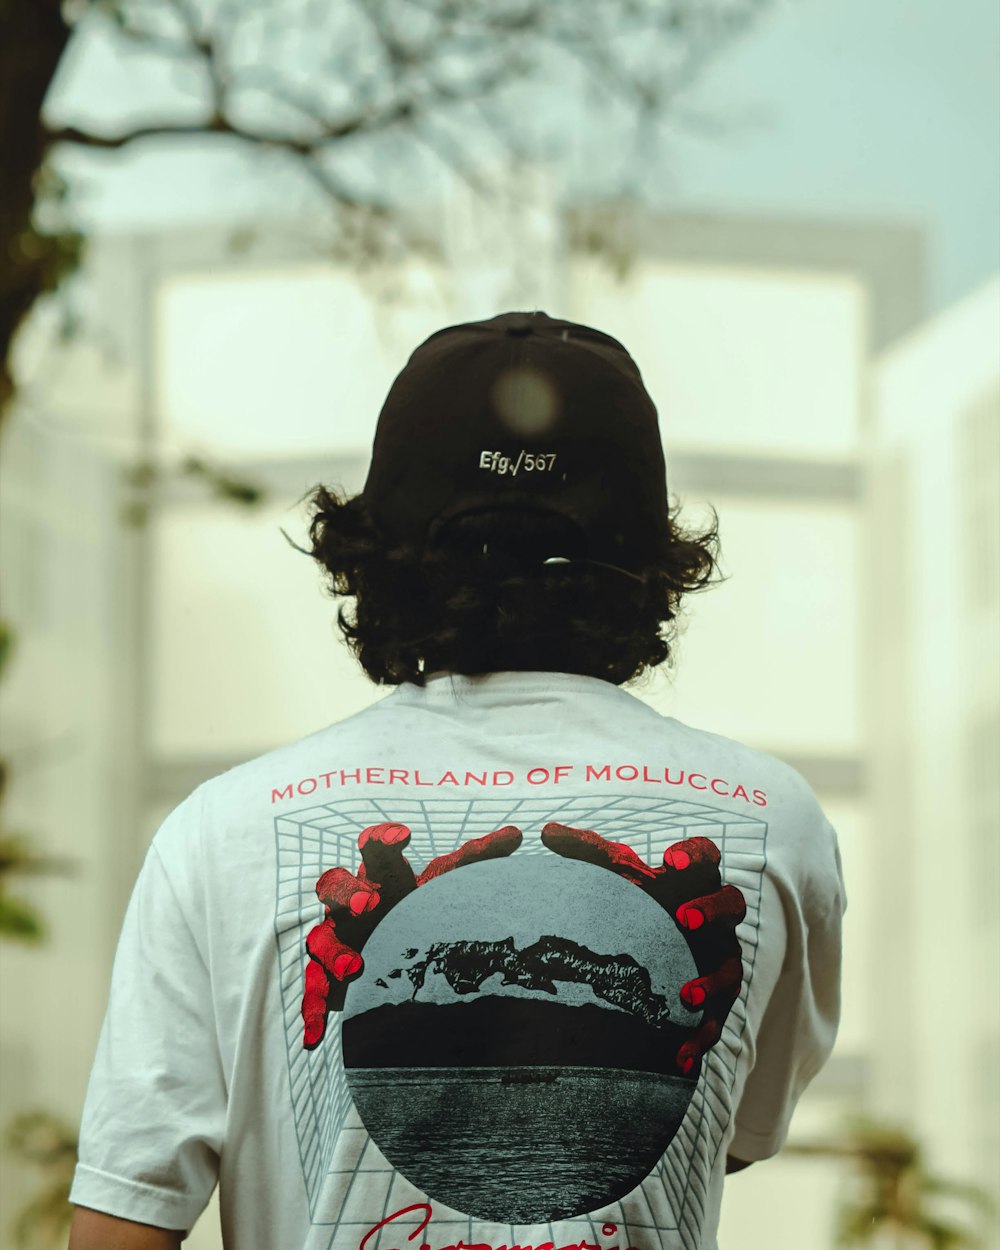 the back of a person wearing a t - shirt with a picture of a mountain